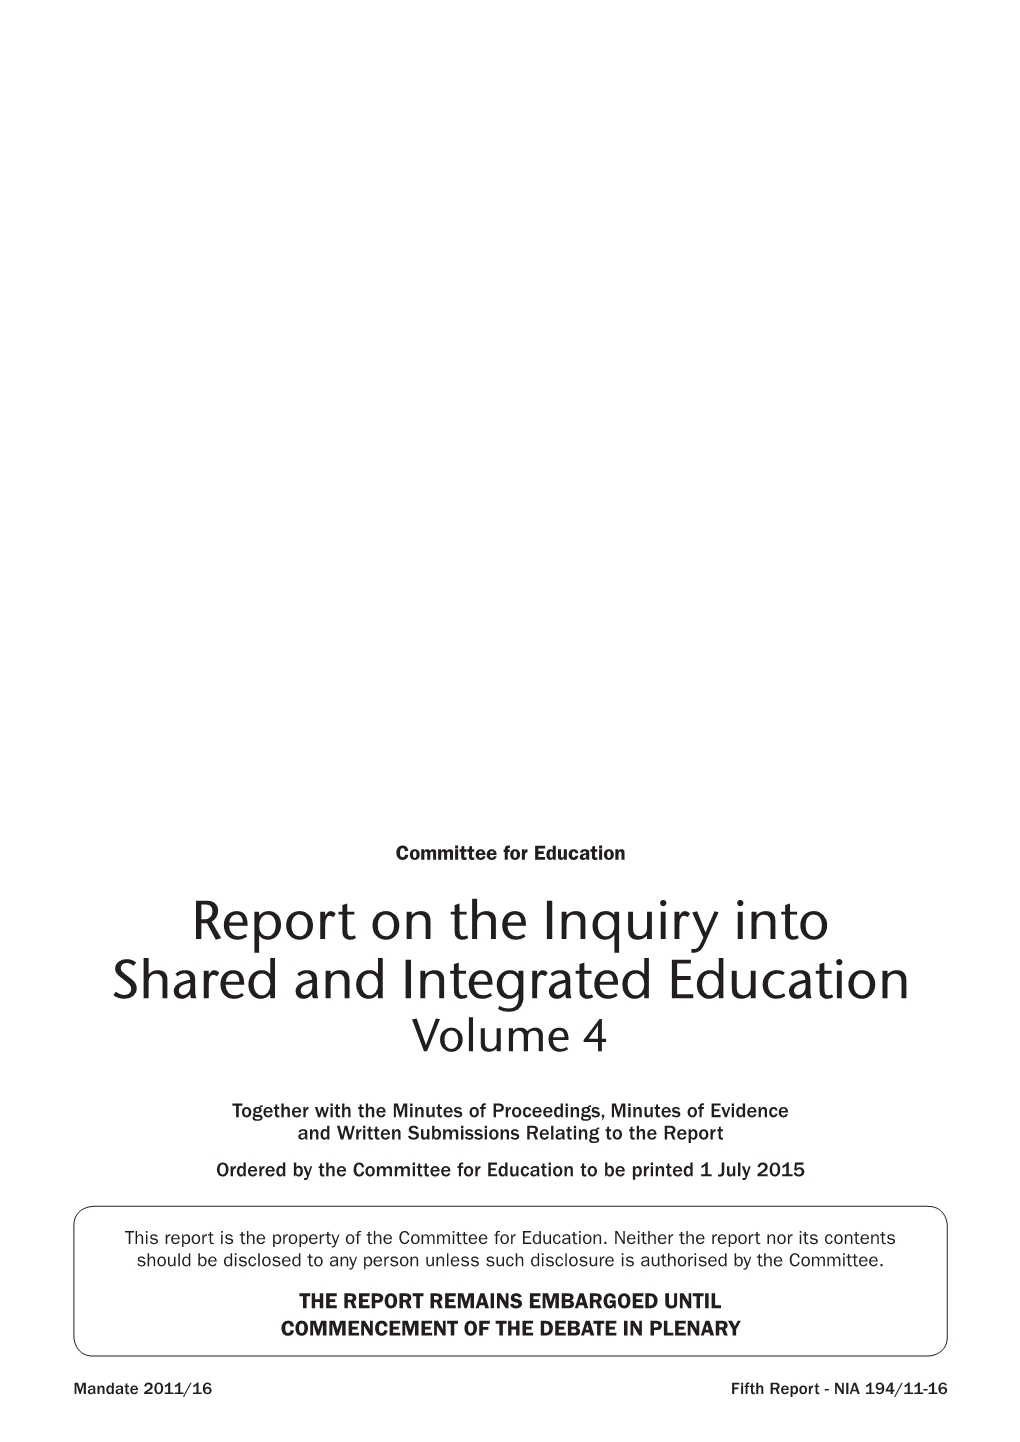 Report on the Inquiry Into Shared and Integrated Education Volume 4